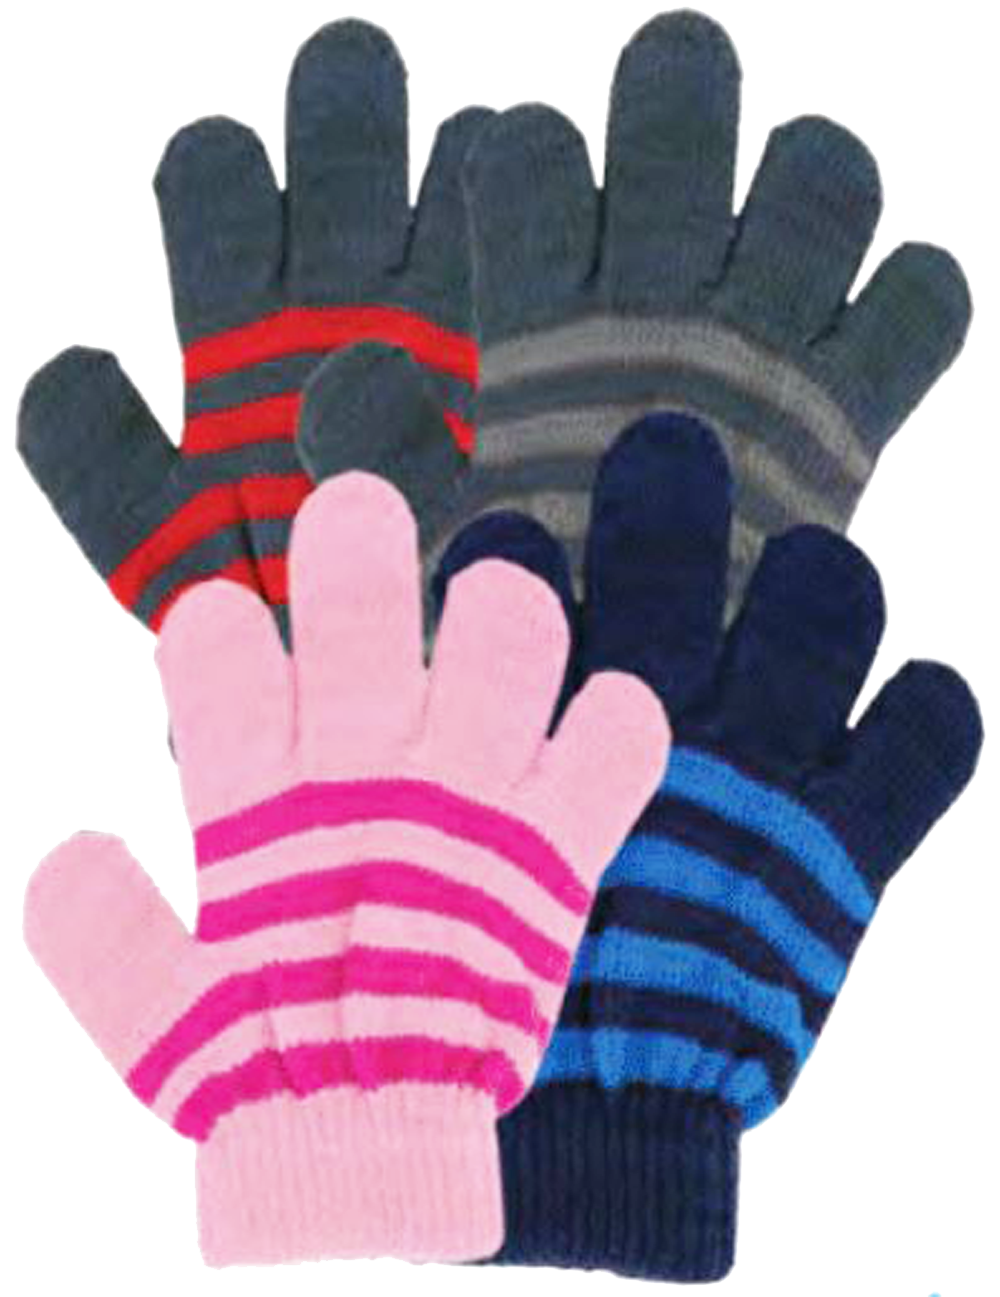 ''Kid's Magic GLOVES, Asst. Colors Striped, Ages 2-4''